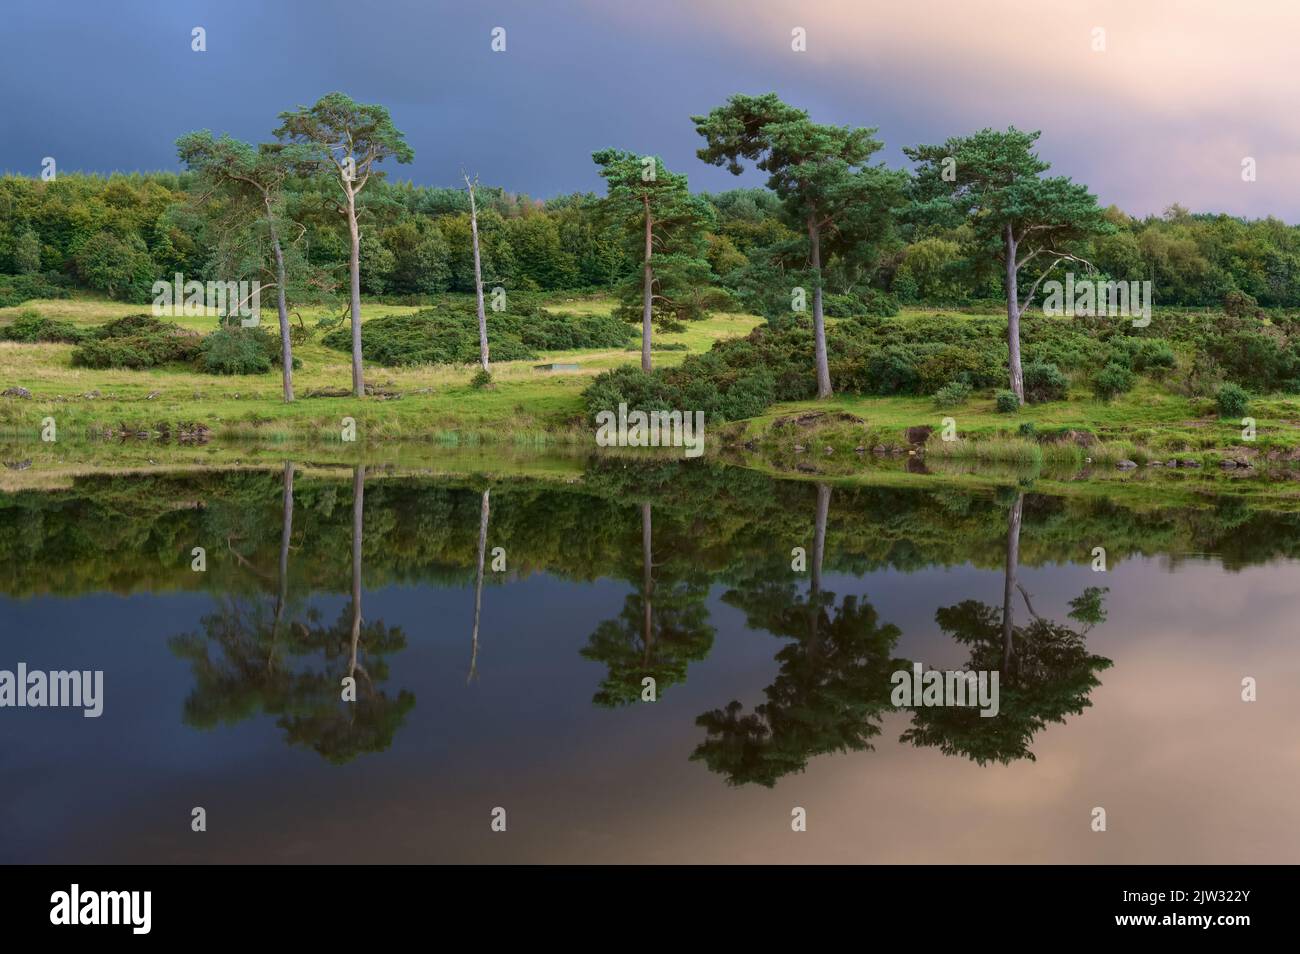 Peaceful calm lake reflection of trees on island at sunset in Kilmacolm Stock Photo